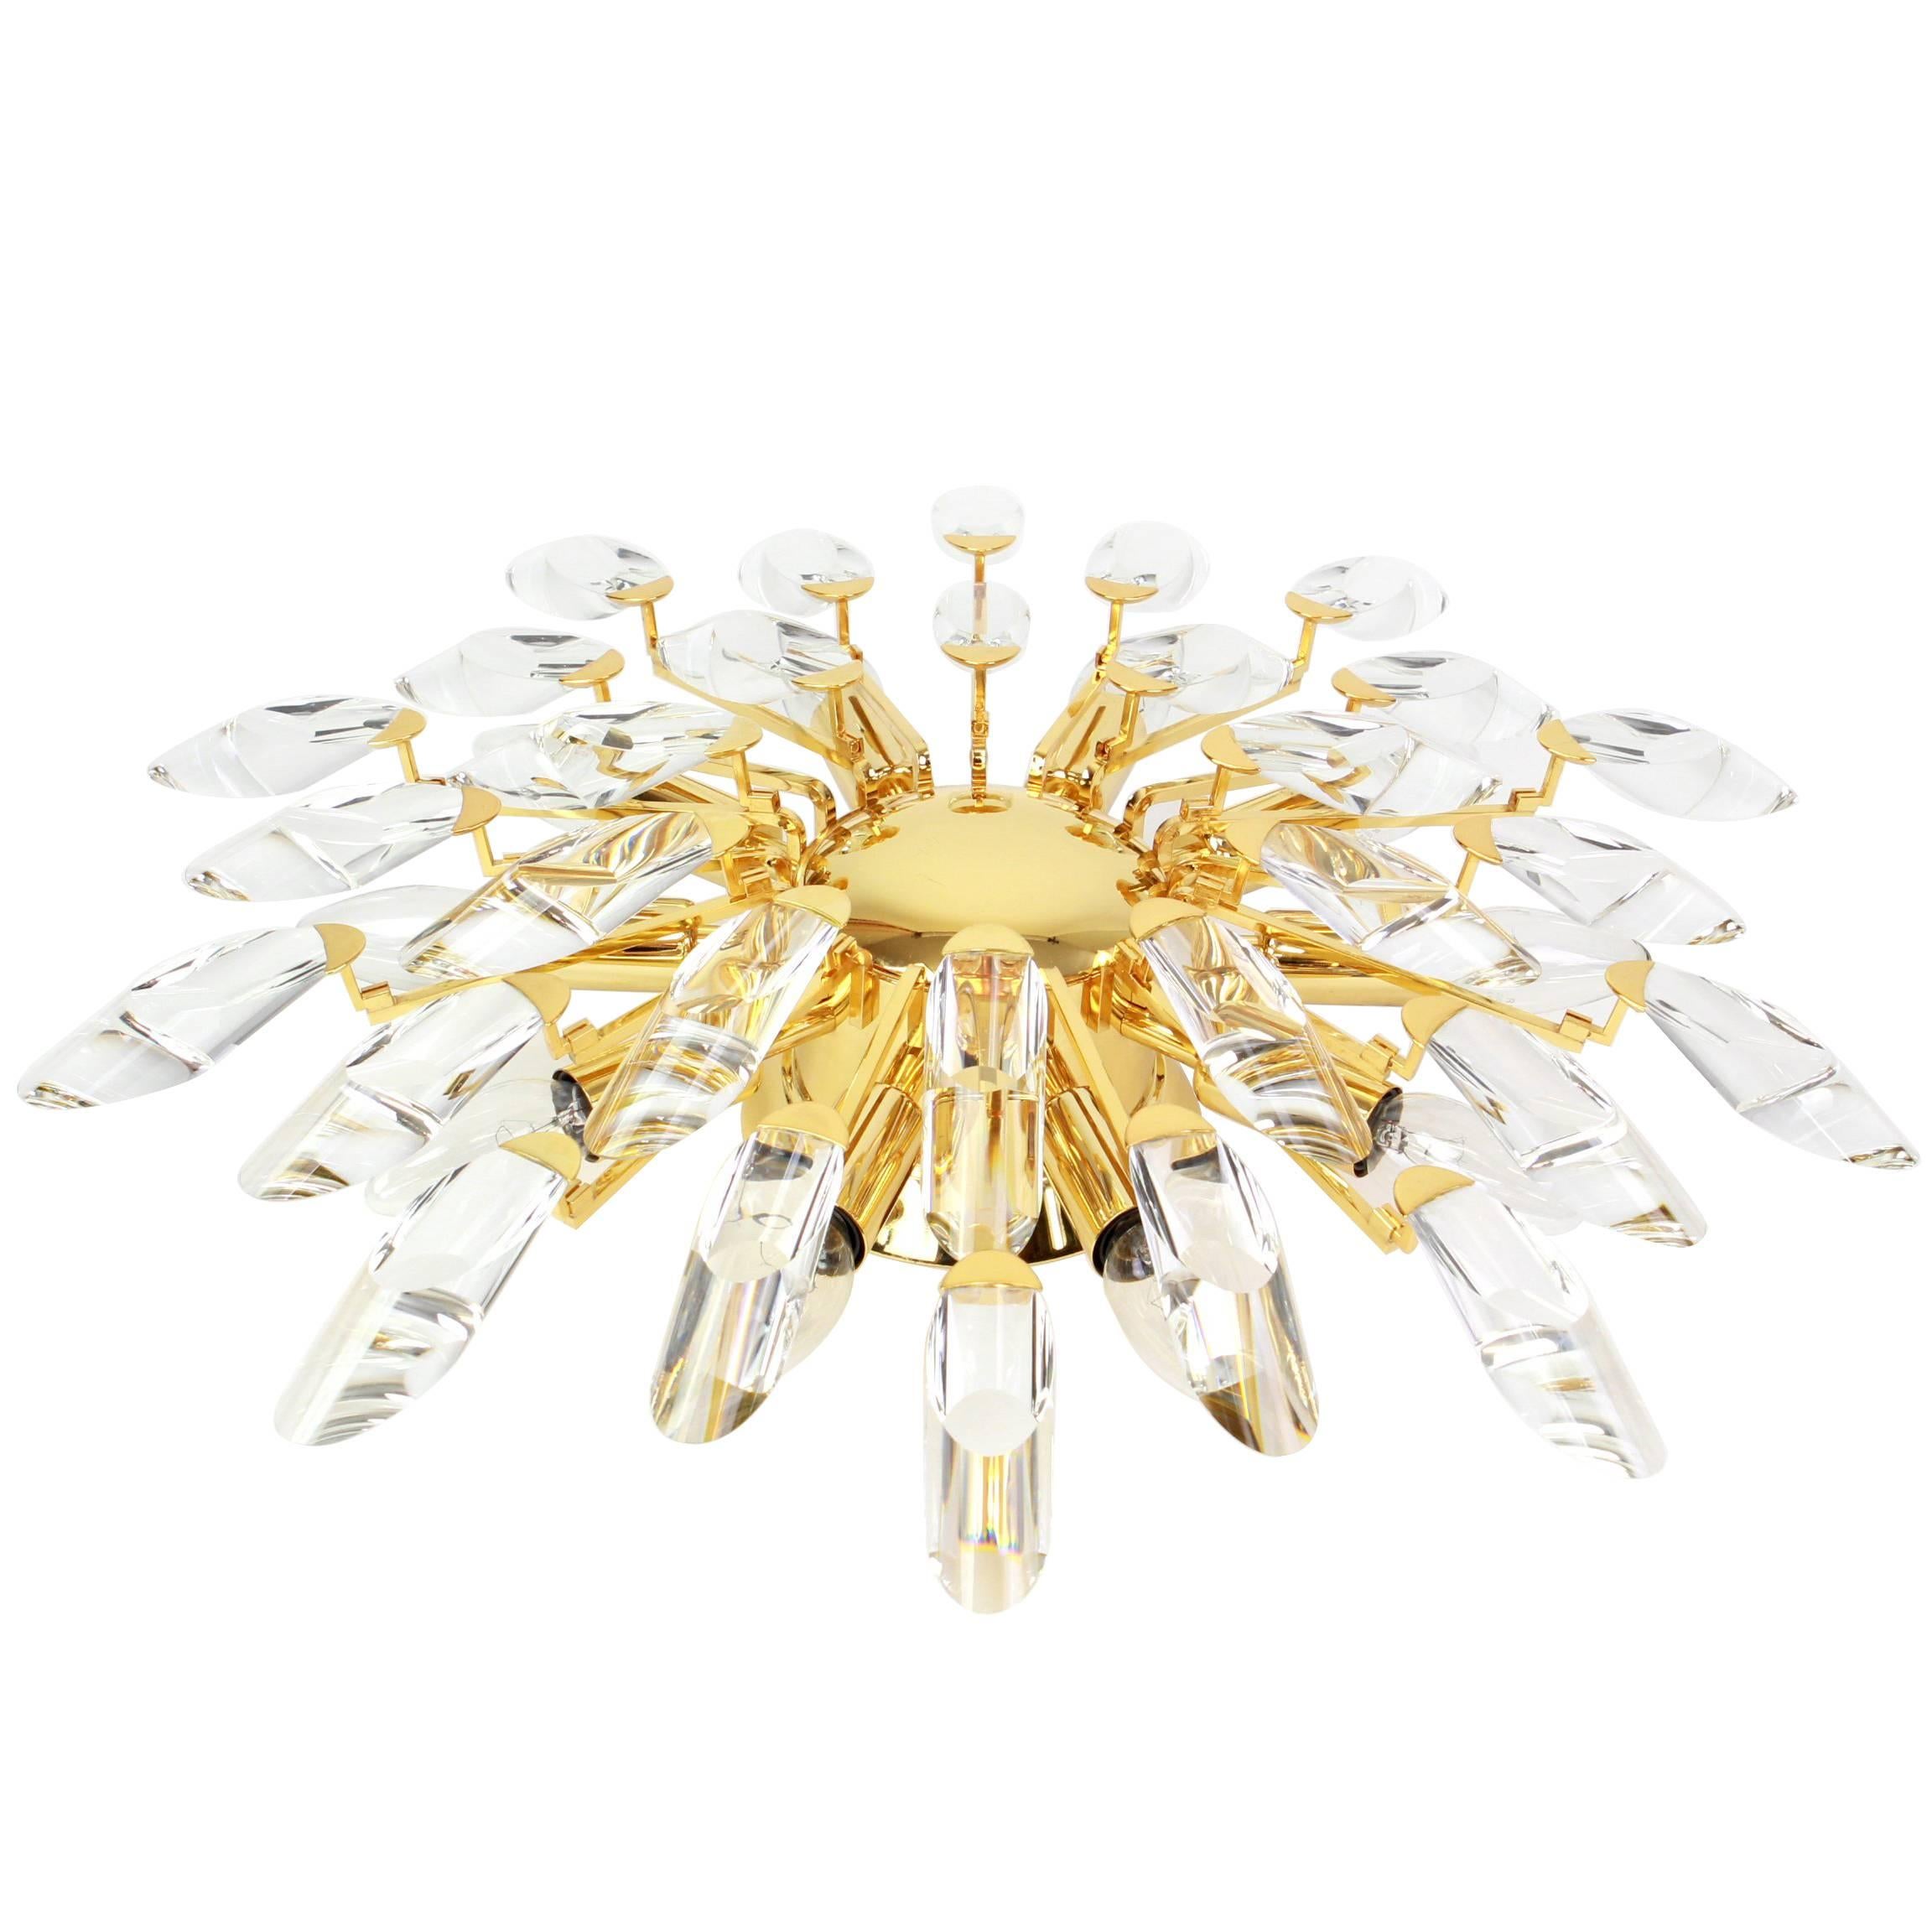 Stunning ceiling light fixture by Stilkronen, Italy, manufactured in midcentury, (1970s-1980s). It is made of gold-plated (24-carat) brass with cut crystal glasses.
Sockets: 10 small Edison base bulbs- E-14 and compatible with the US/UK/ etc.